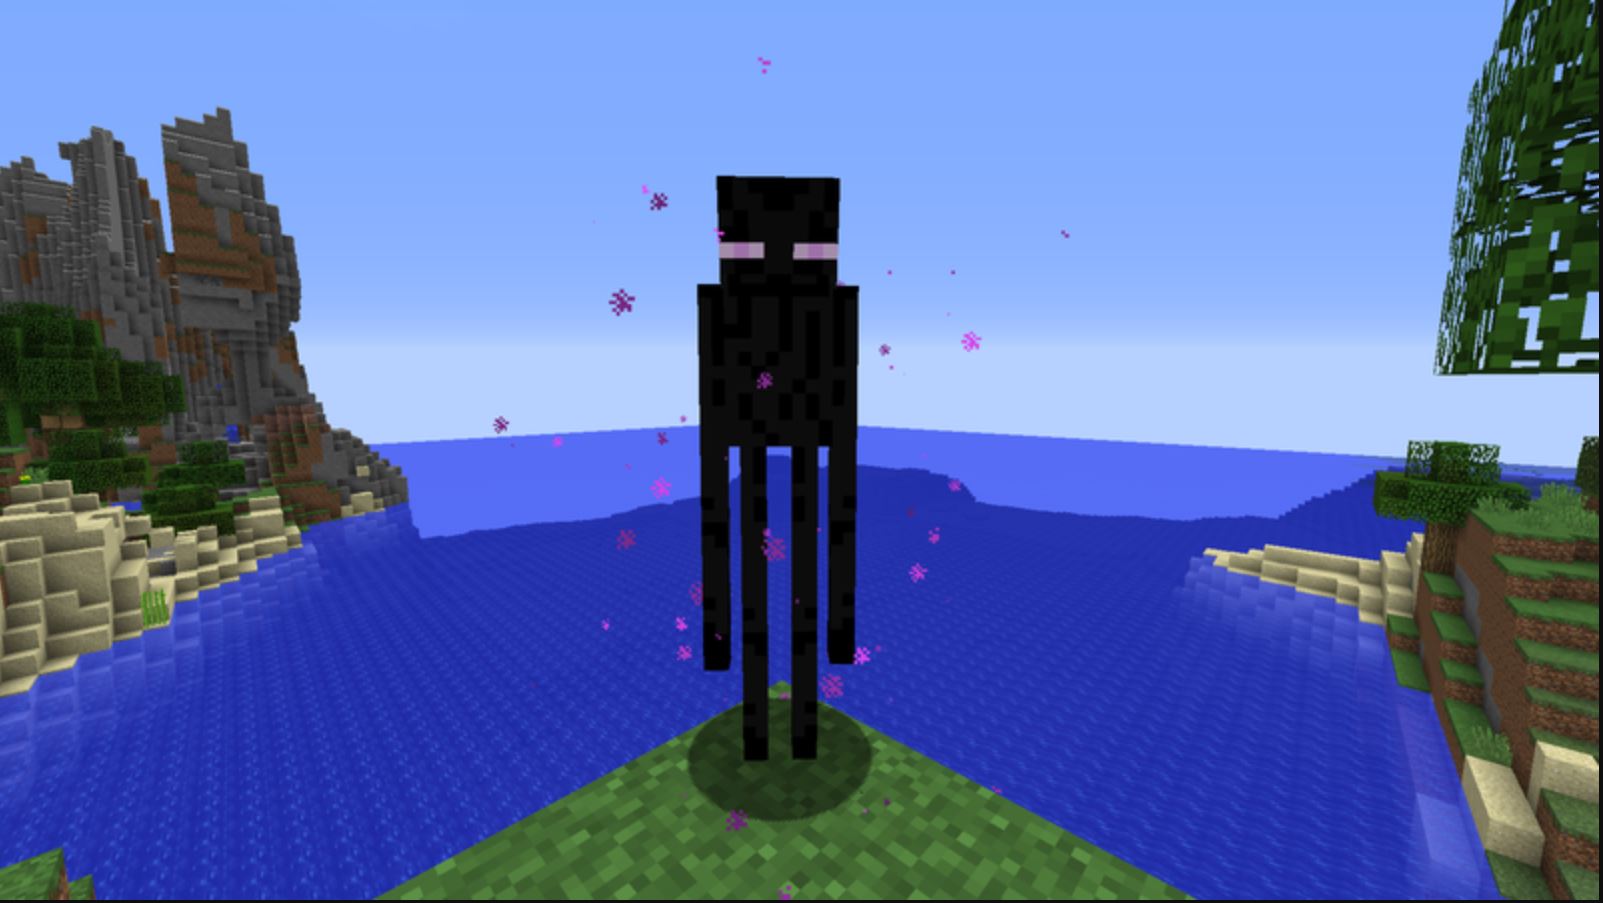 Minecraft Mobs Explored: Enderman, And How To Defeat/Avoid Them!